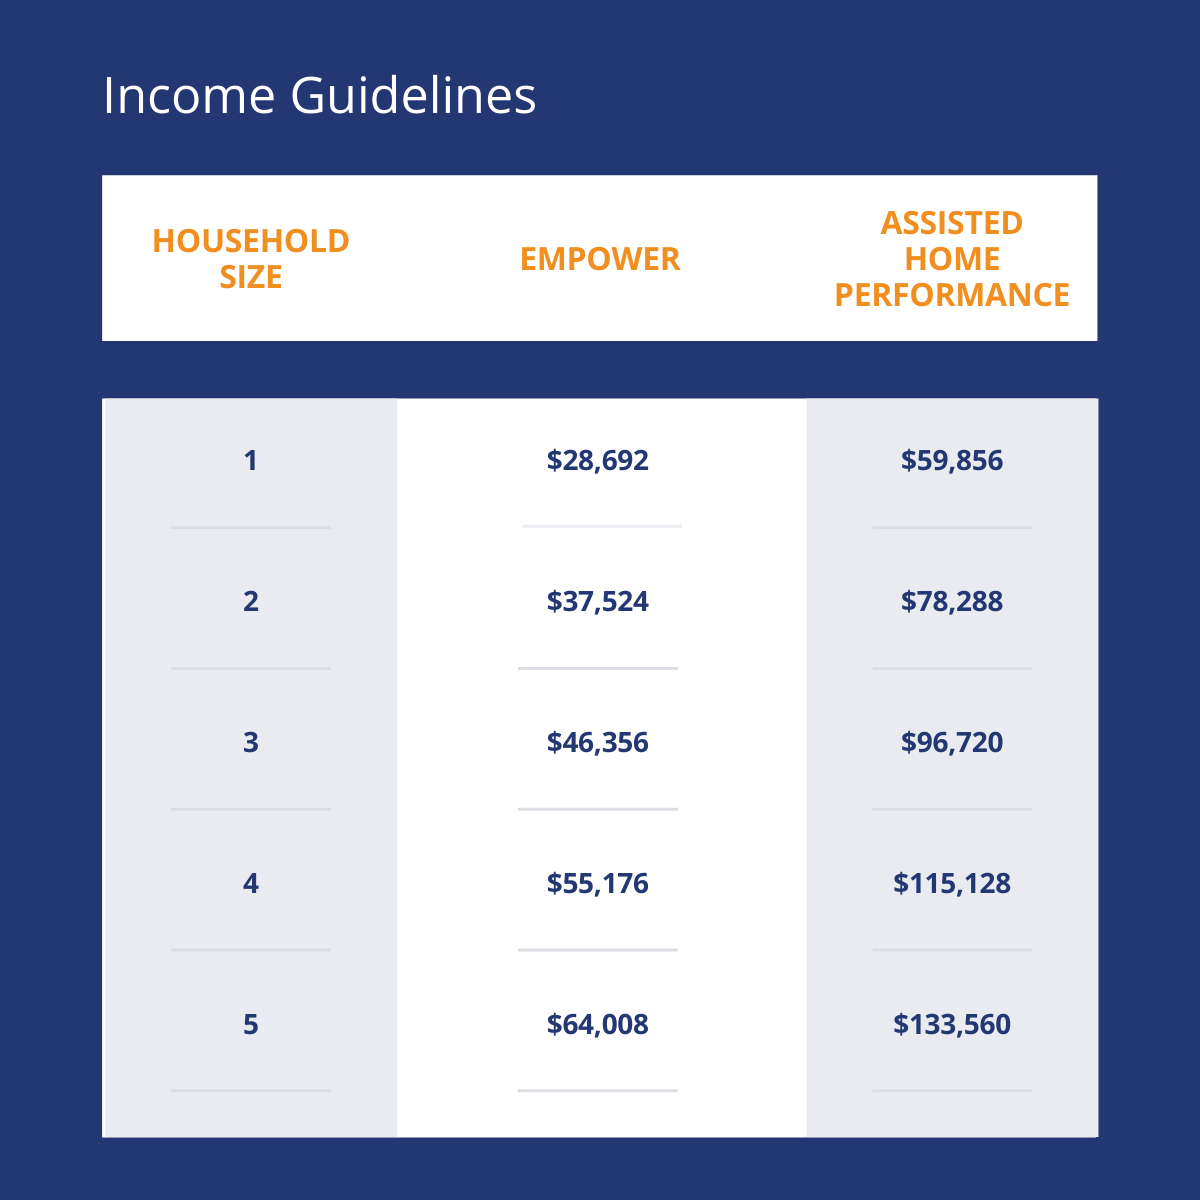 Income guidelines for Empower and Assisted Home Performance